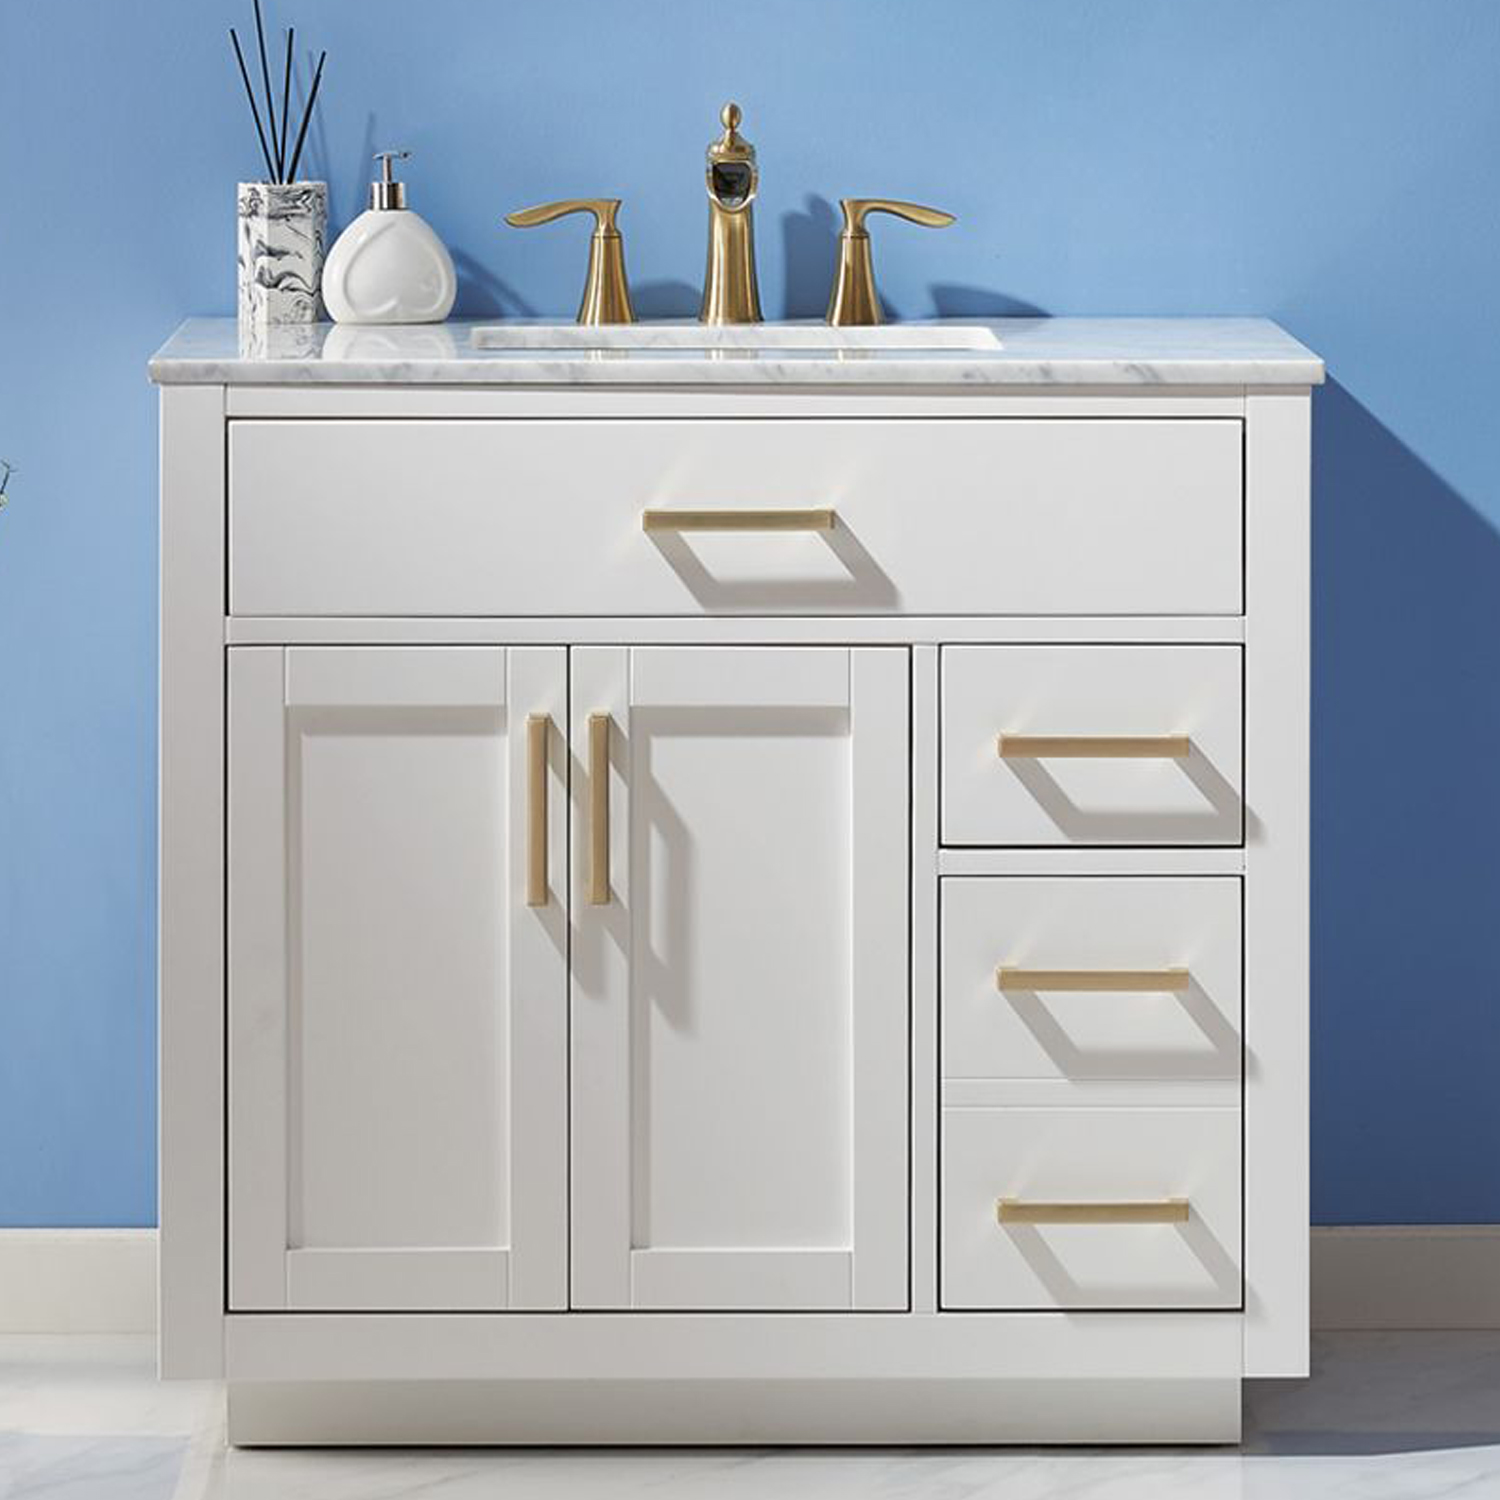 Issac Edwards Collection 36" Single Bathroom Vanity Set in White and Carrara White Marble Countertop